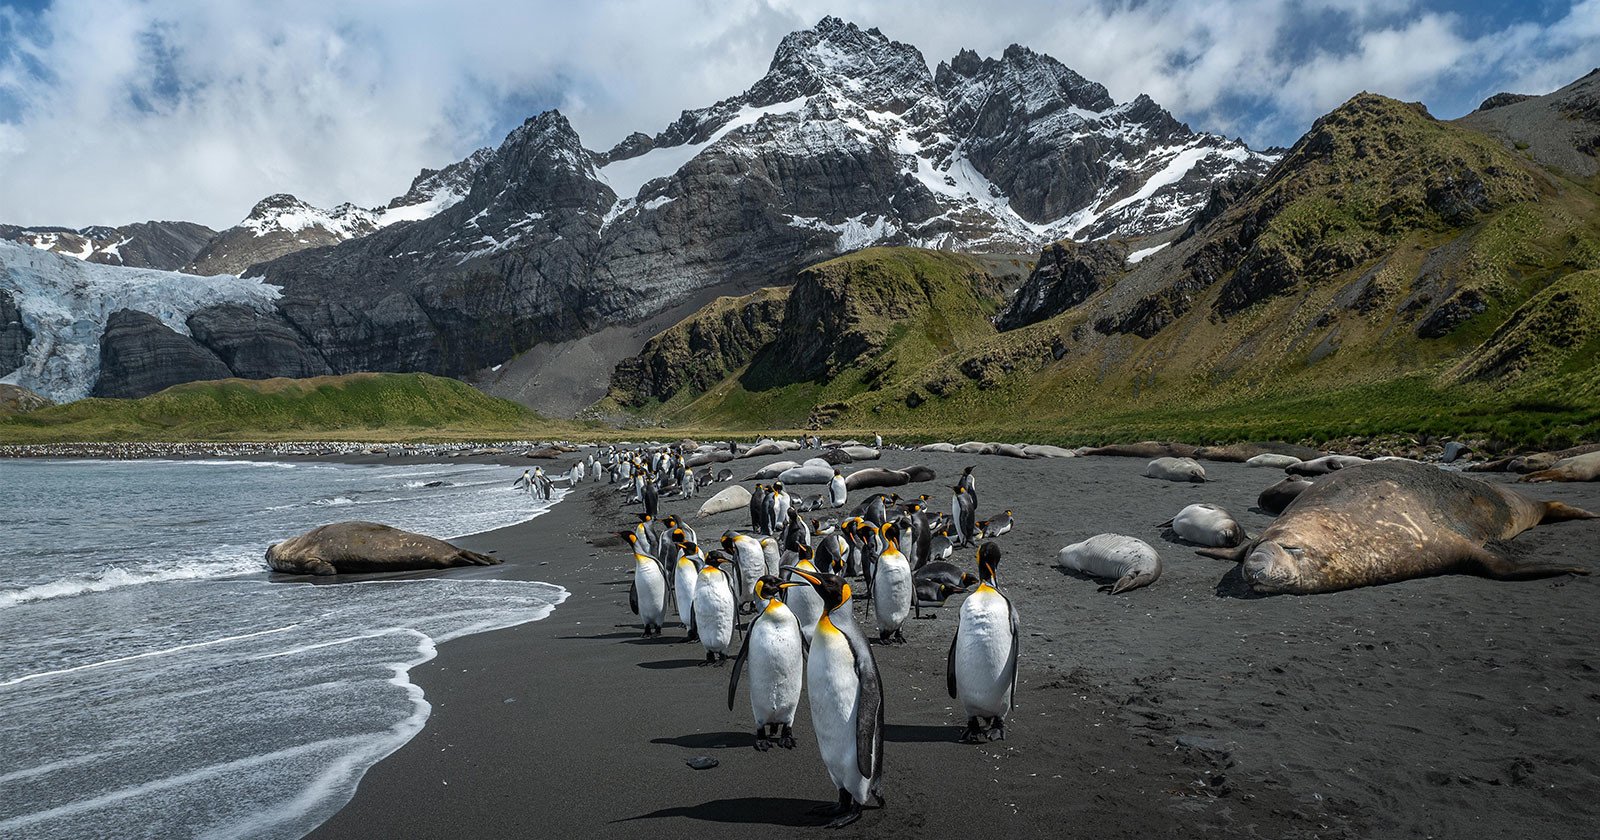 Photographing Antarctica: Penguins, Seals, and a Total Solar Eclipse